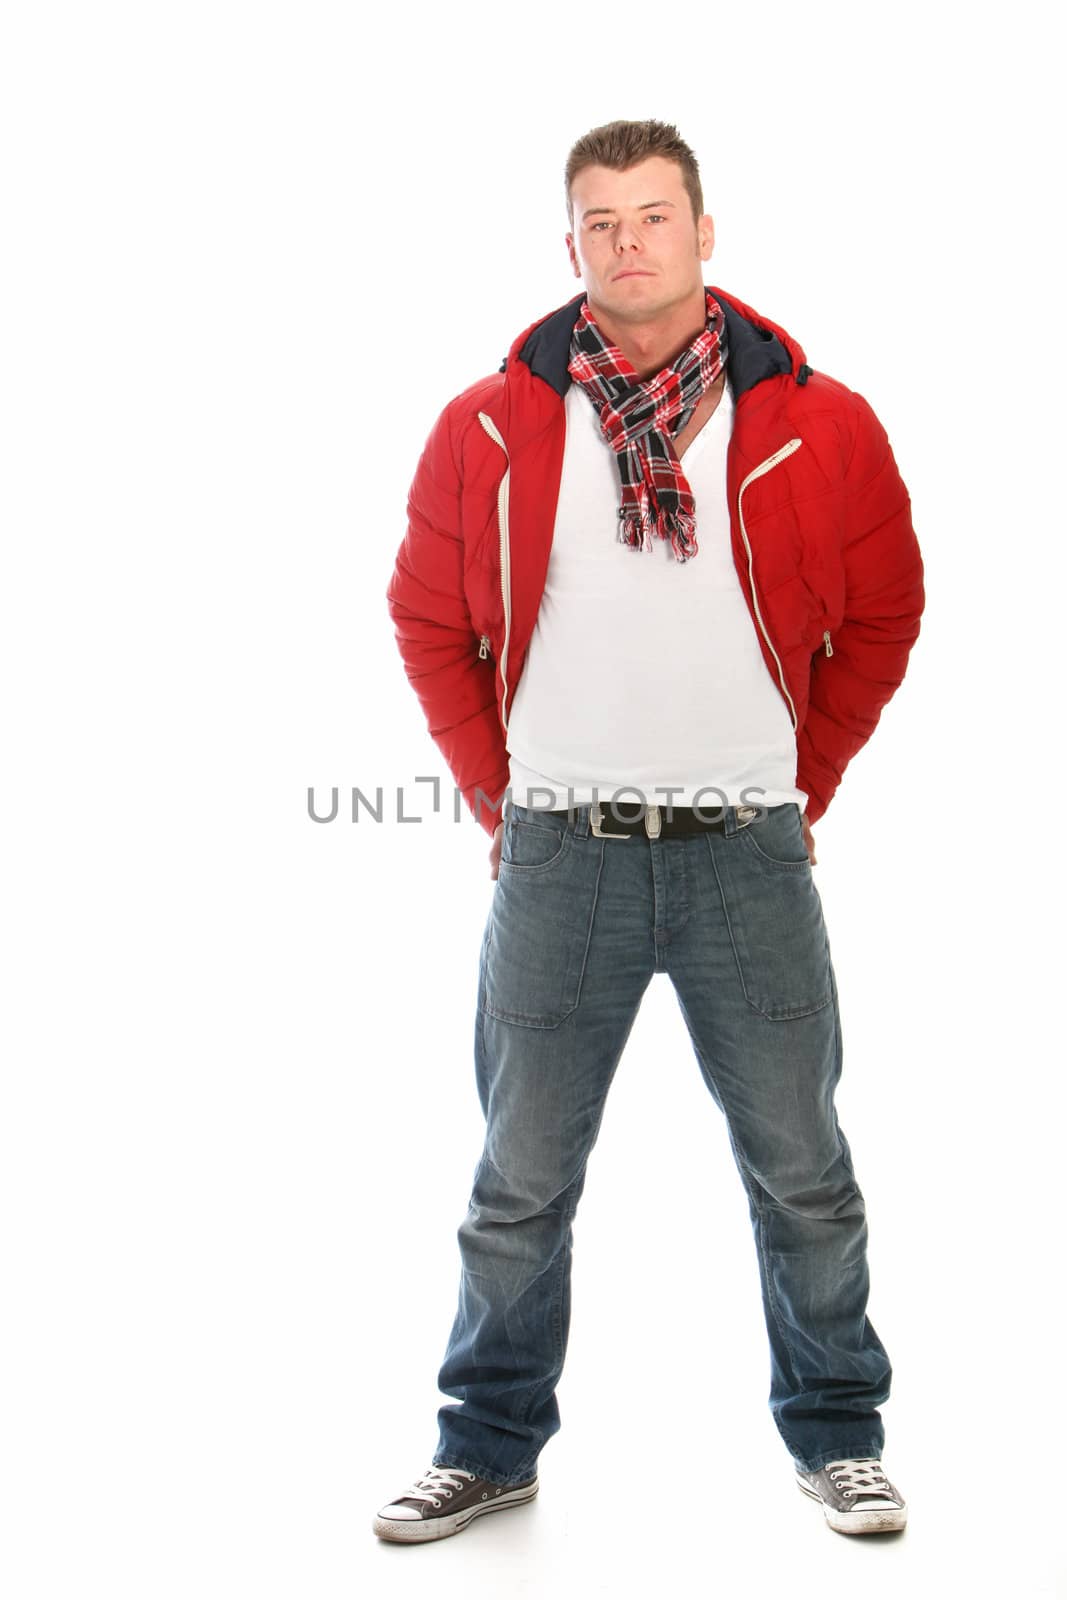 Casual man wearing red jacket and jeans standing on a white background